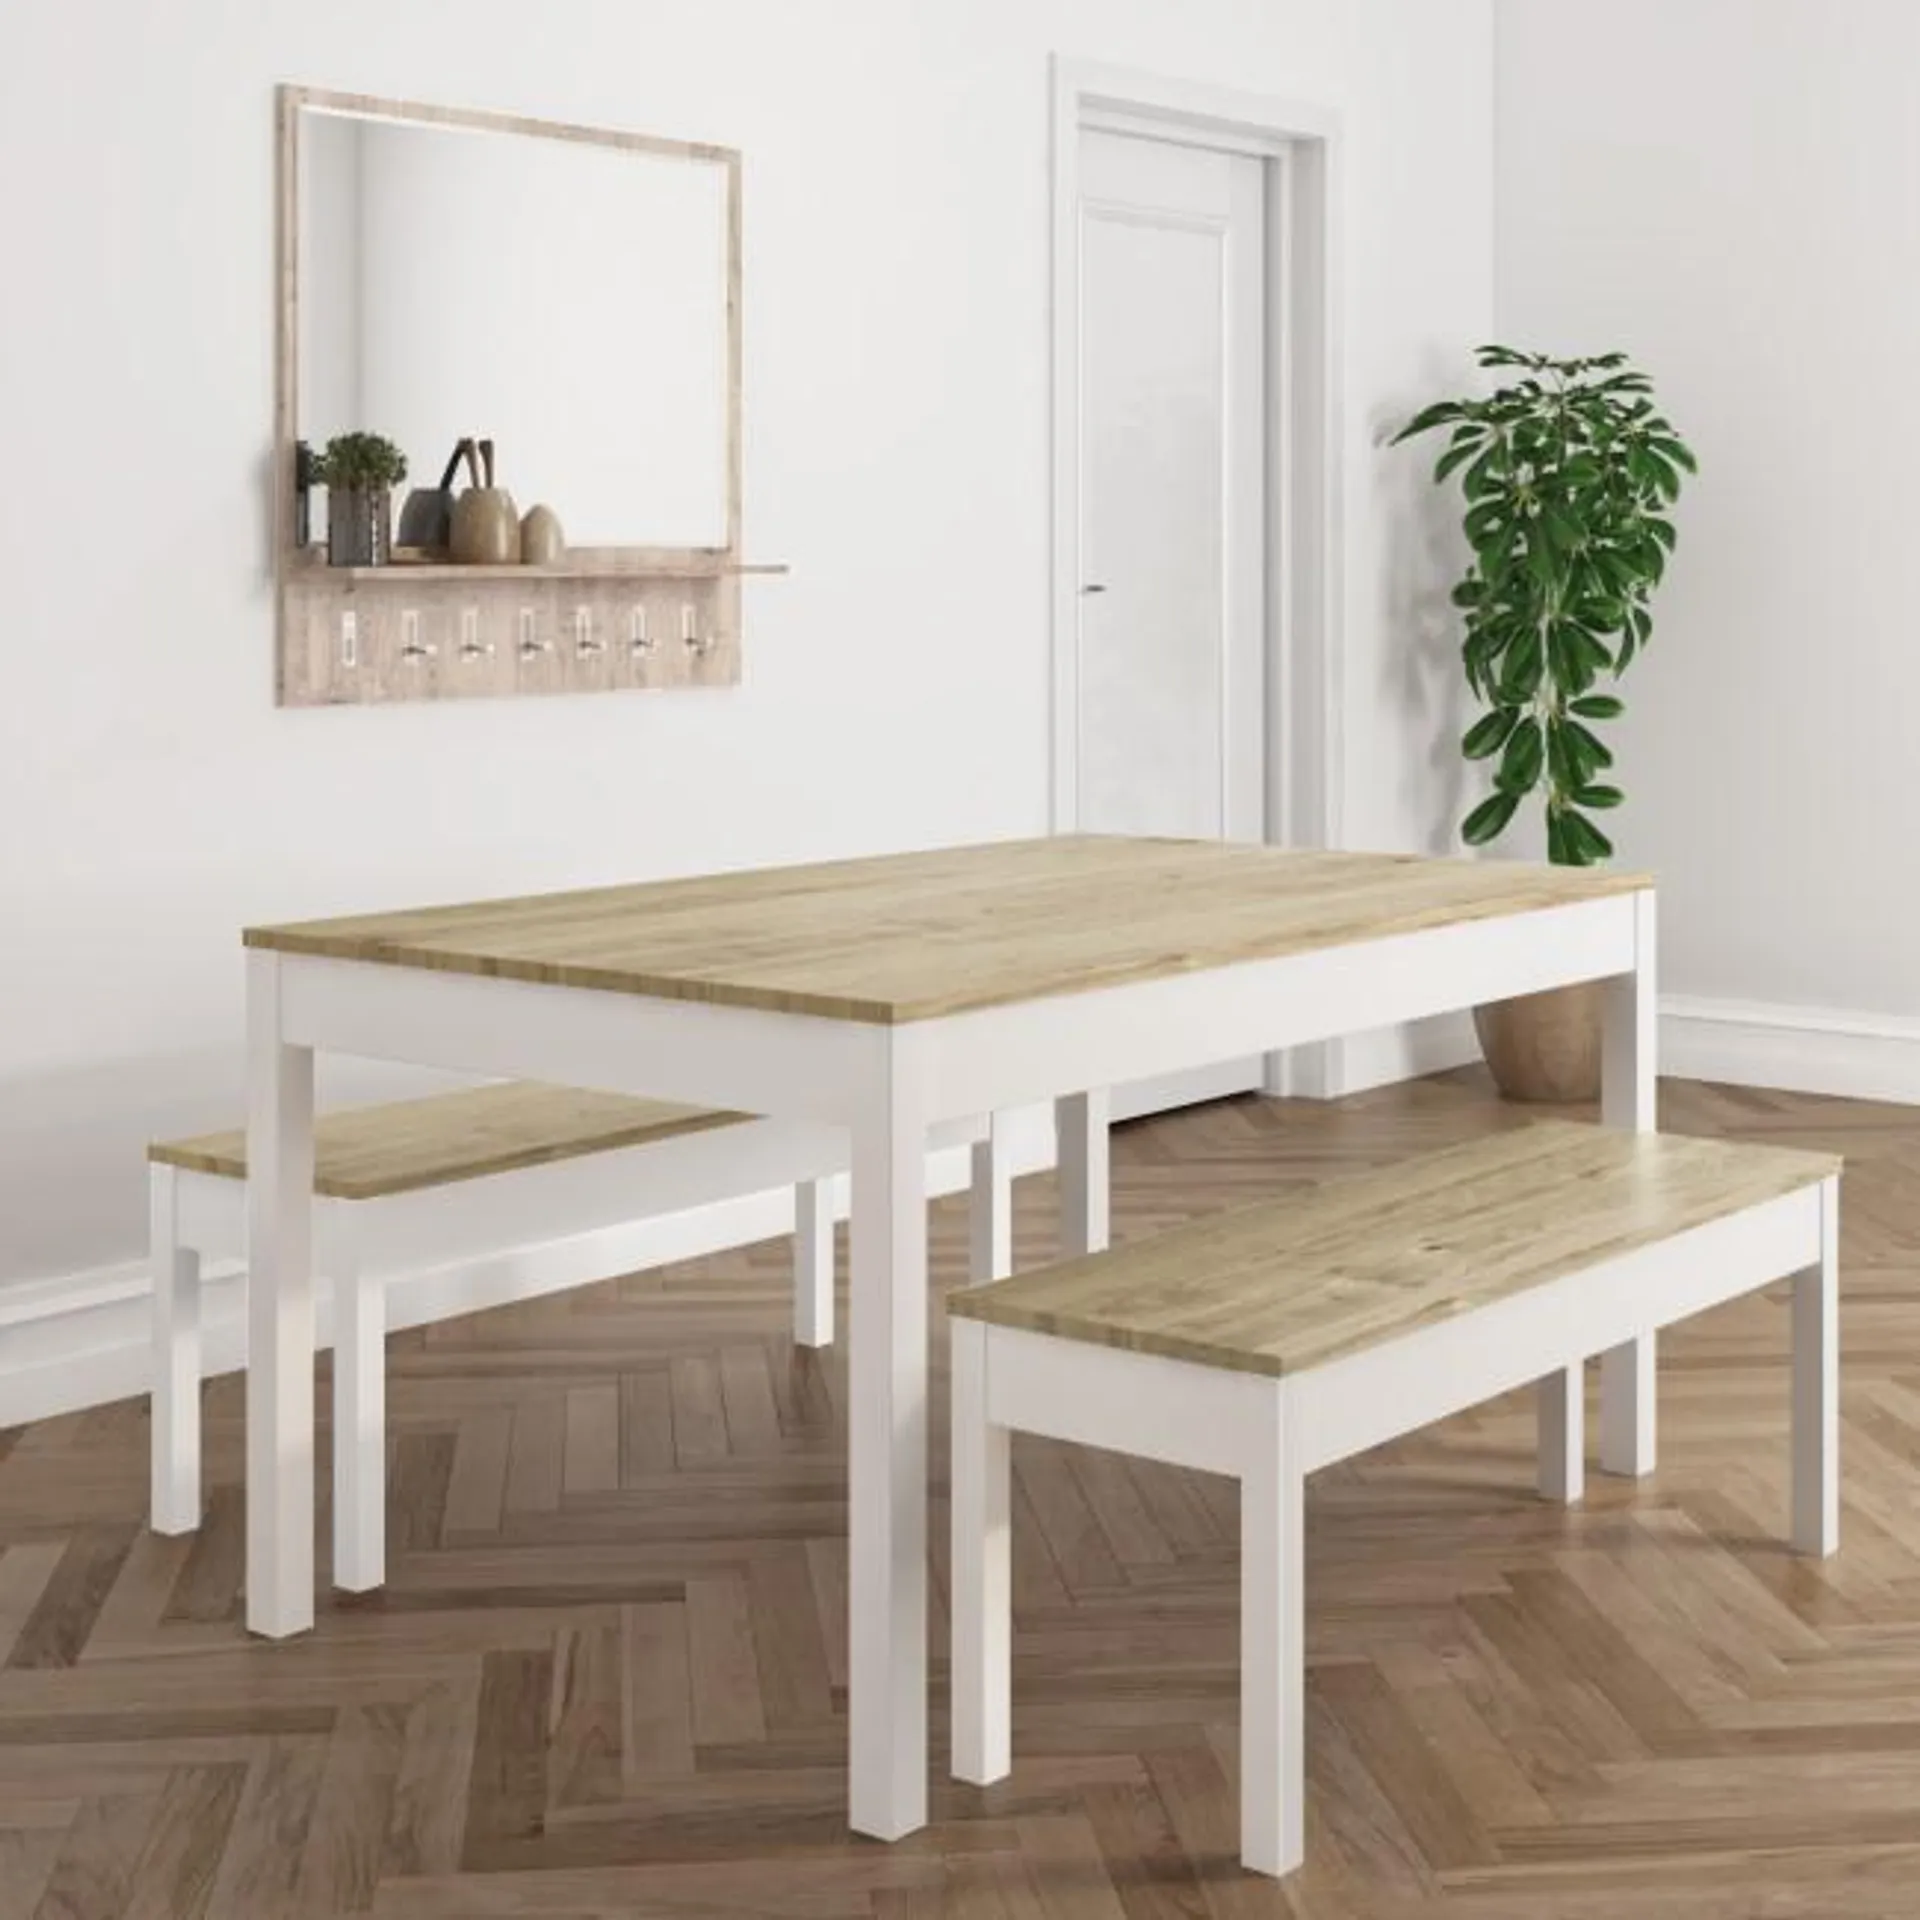 Pine & White Dining Table with 2 Dining Benches - Seats 4 - Emerson